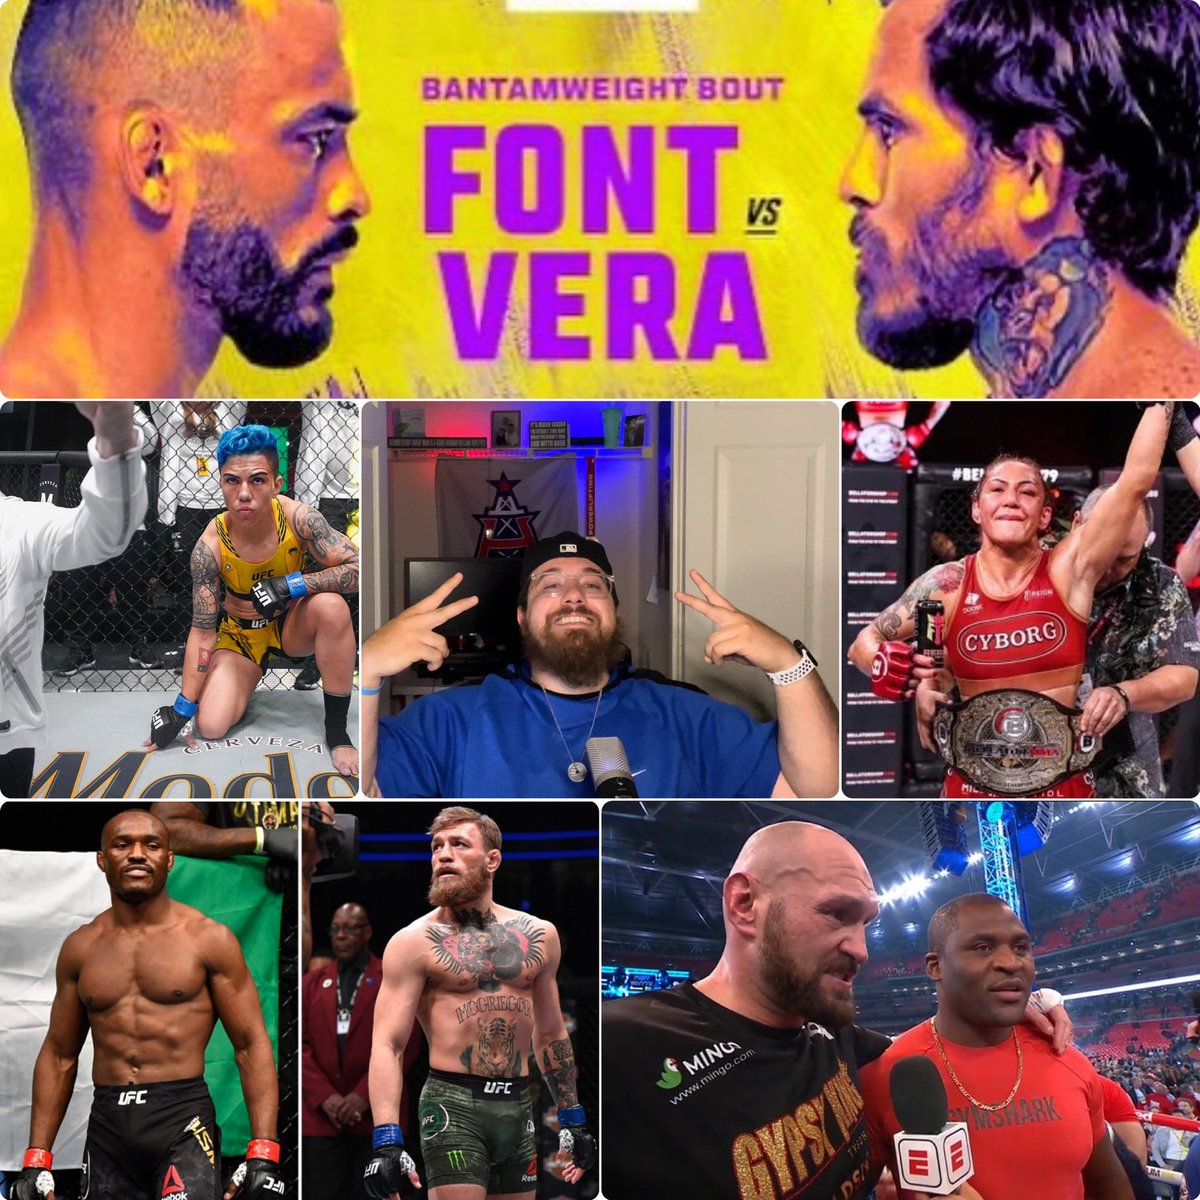 🚨NEW PODCAST ALERT!!!!🚨Dropped the audio today on Spotify, Apple and more! YouTube video will be up tomorrow morning!! Recap of this past weekends UFC, Bellator, and Tyson Fury’s last fight! #UFCVegas52 #UFC #Bellator277 #MMA #MMATwitter 
•
linktr.ee/Kodieybarbo